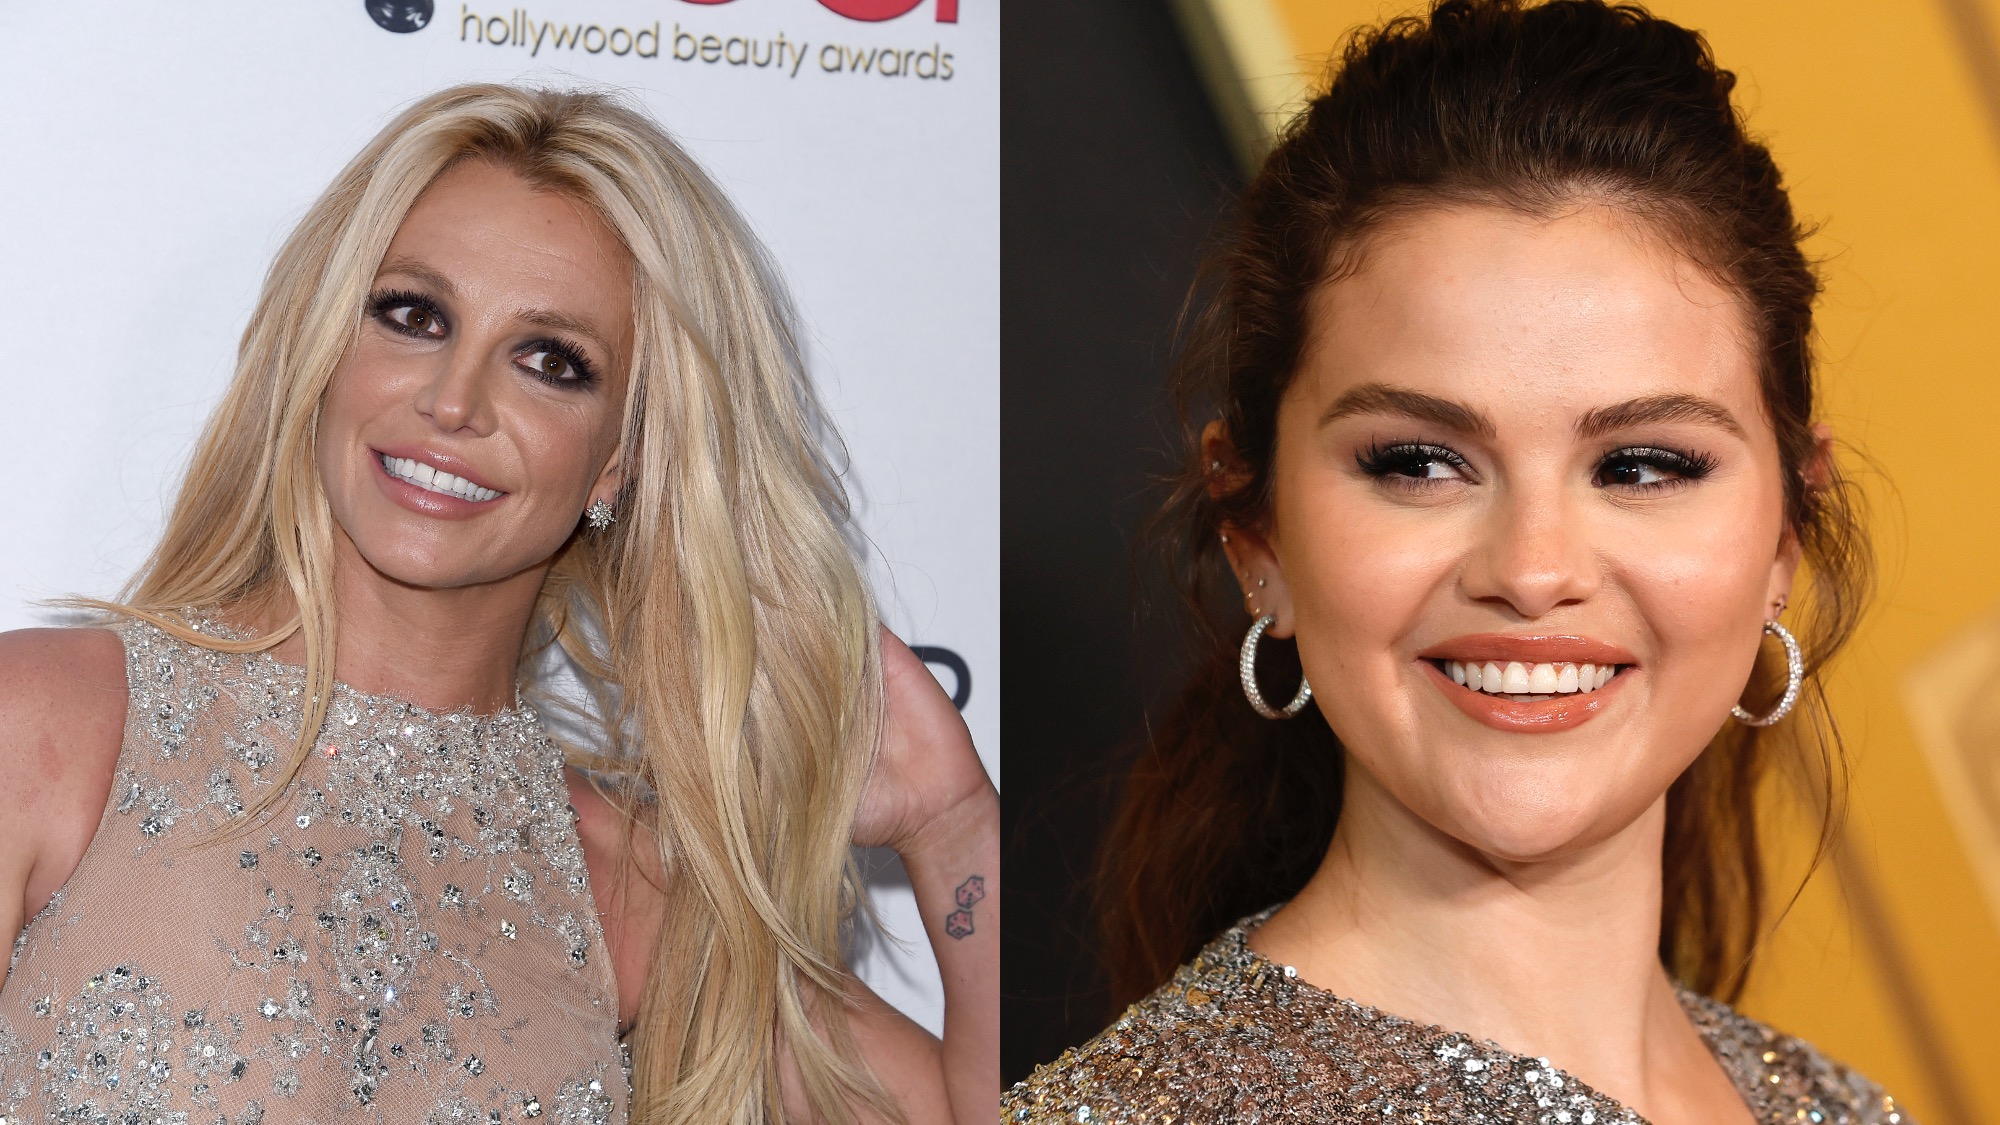 Britney Spears (L) seemed to call out Selena Gomez (R) for her 'nerve.'